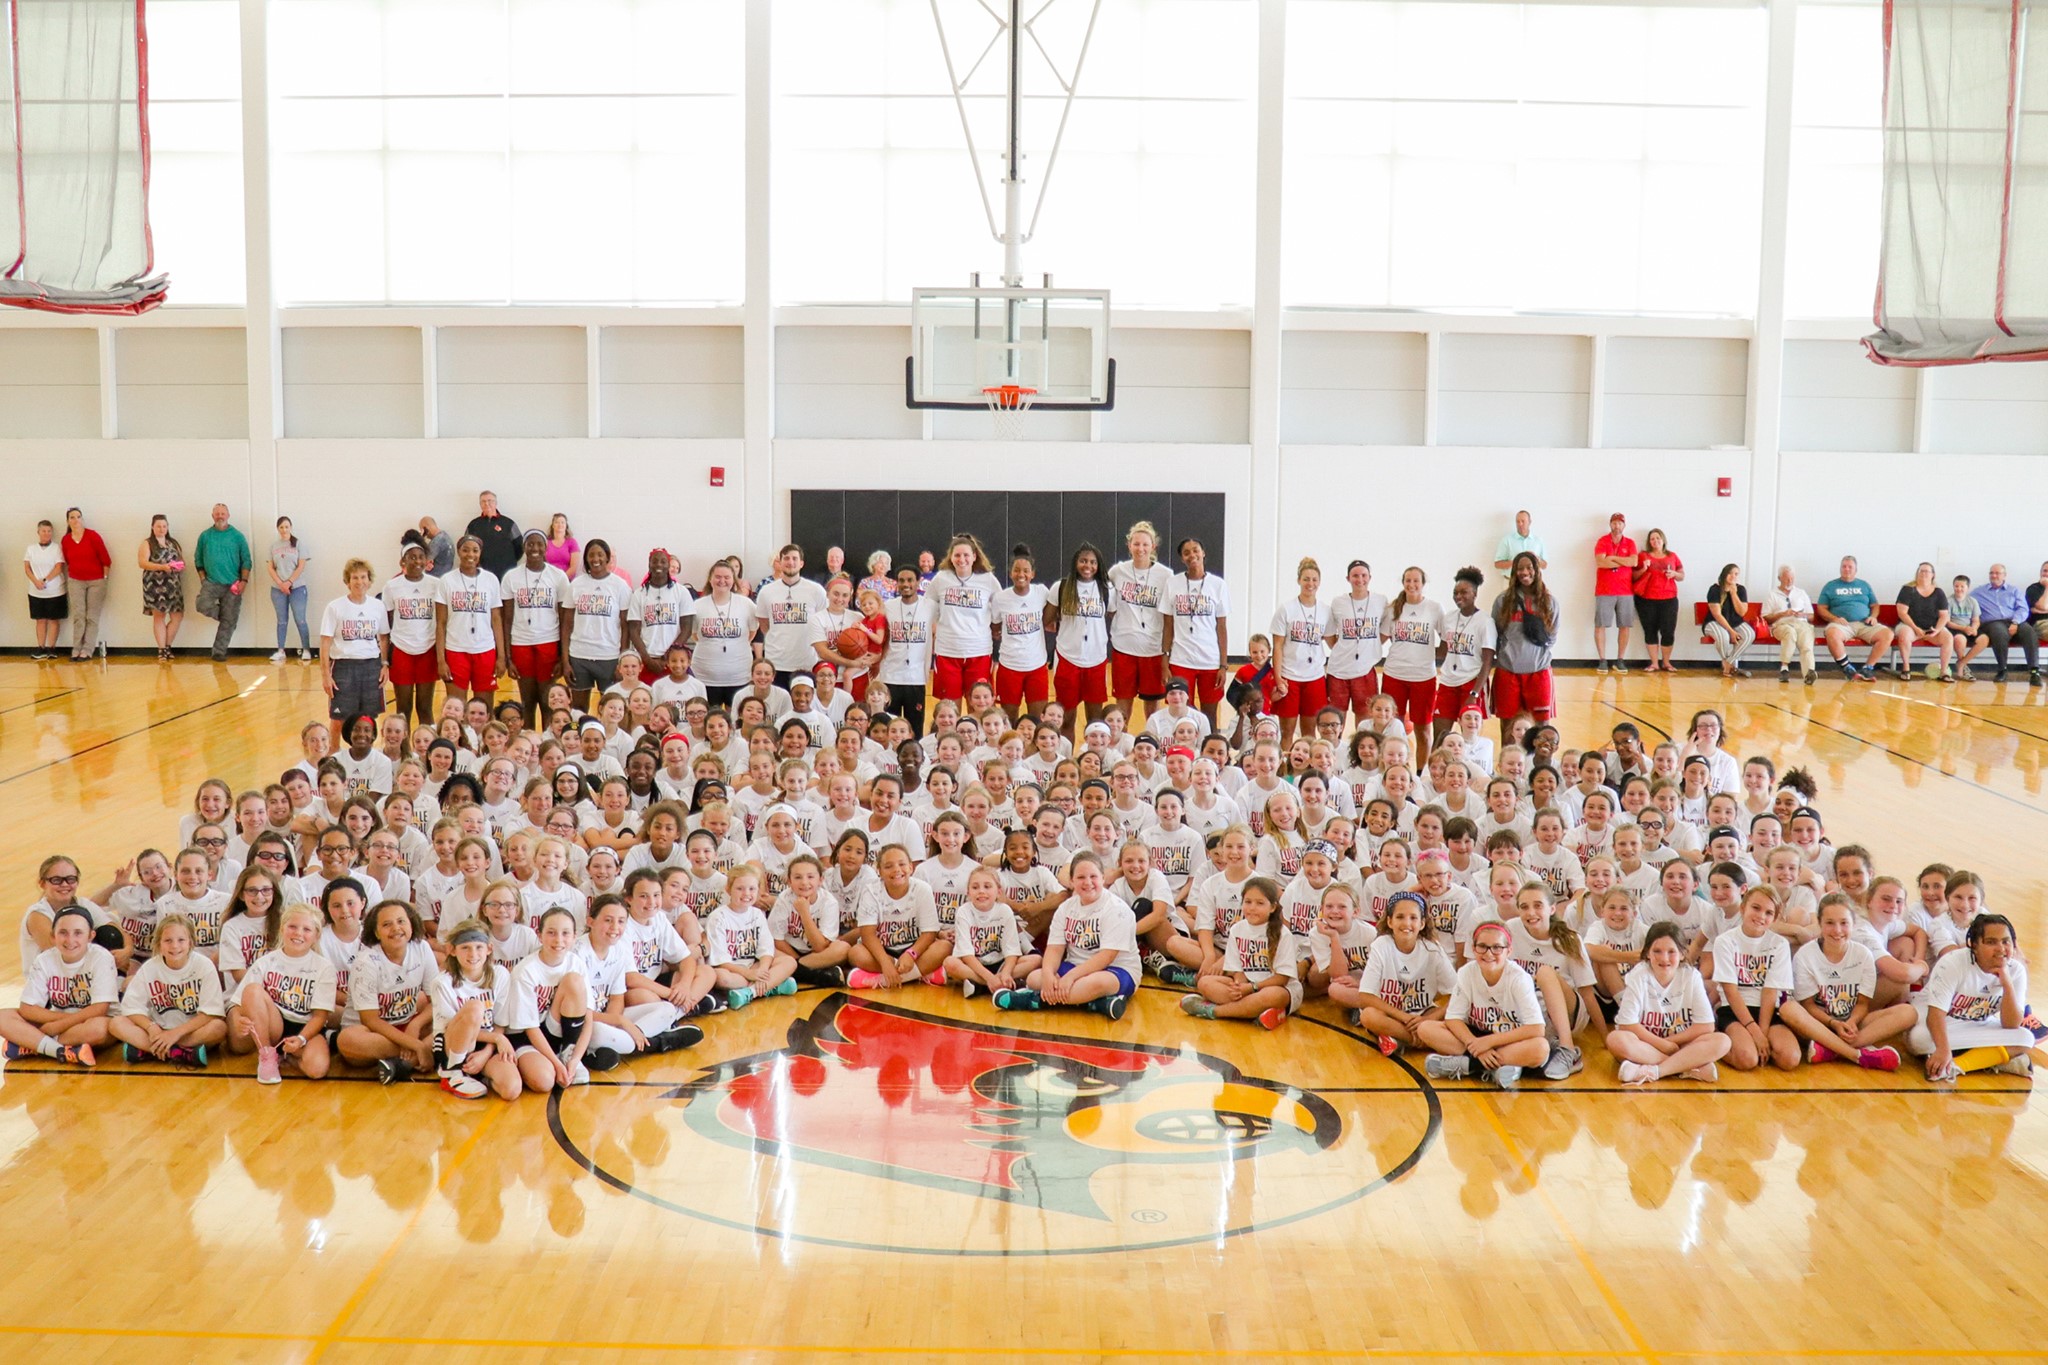 Participants from this year's Women's Basketball Camp.